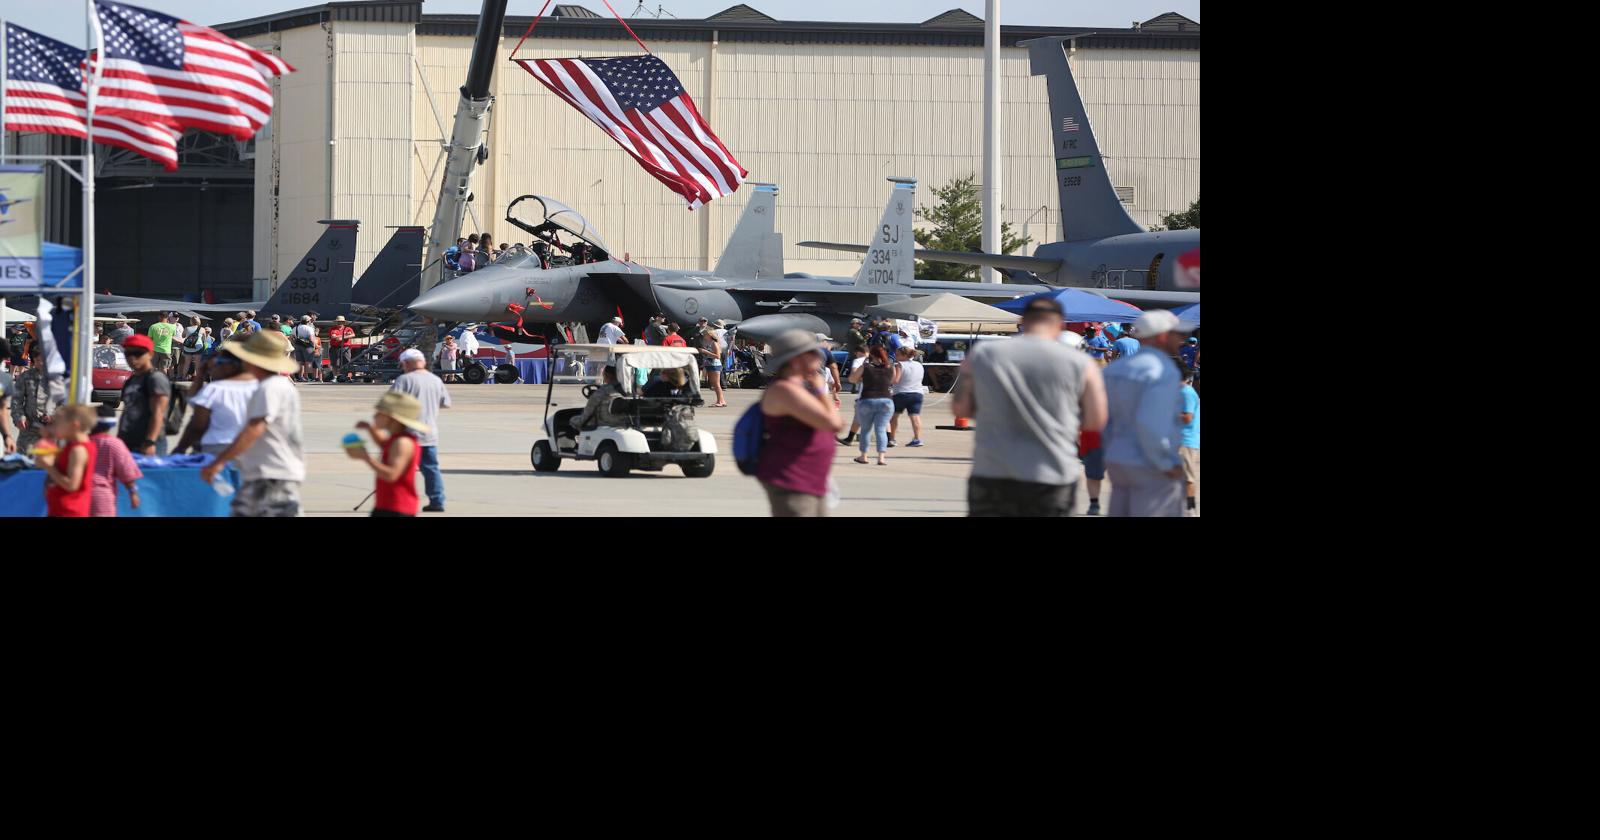 Armed Forces Day > 15th Wing > Article Display